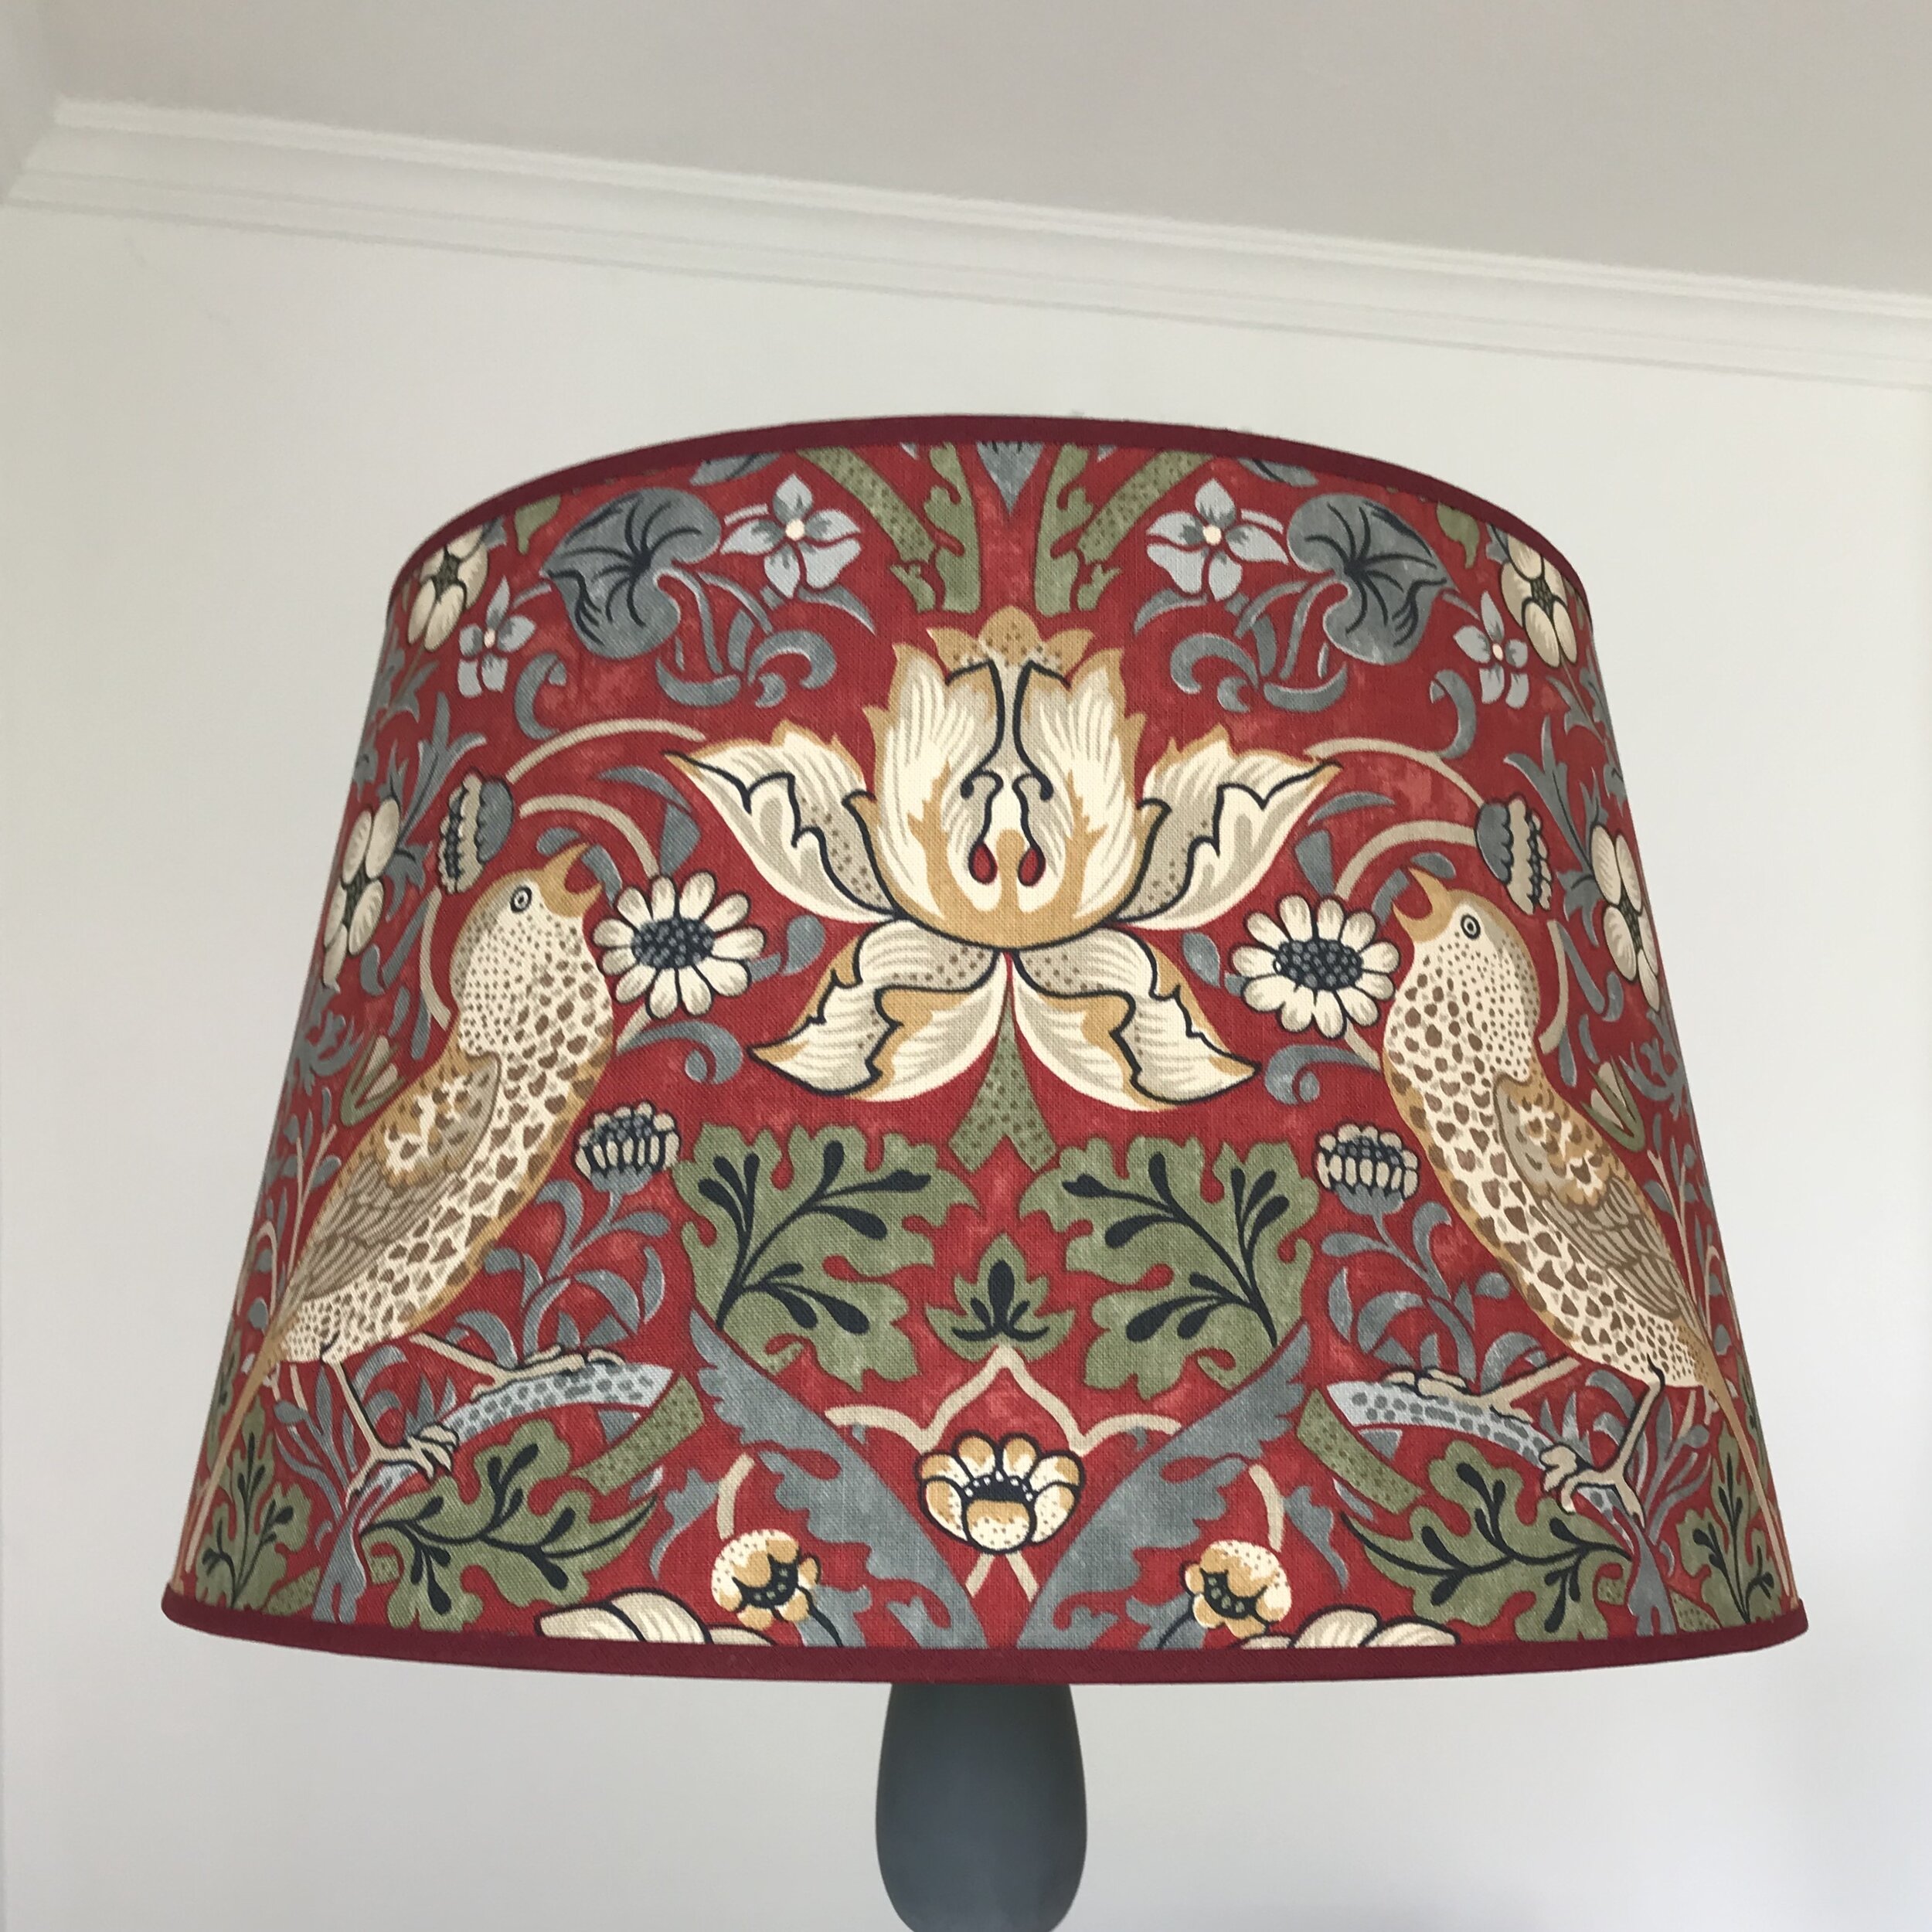 William Morris Red Strawberry Thief Fabric lampshade Ceiling Pendant Table Lamp